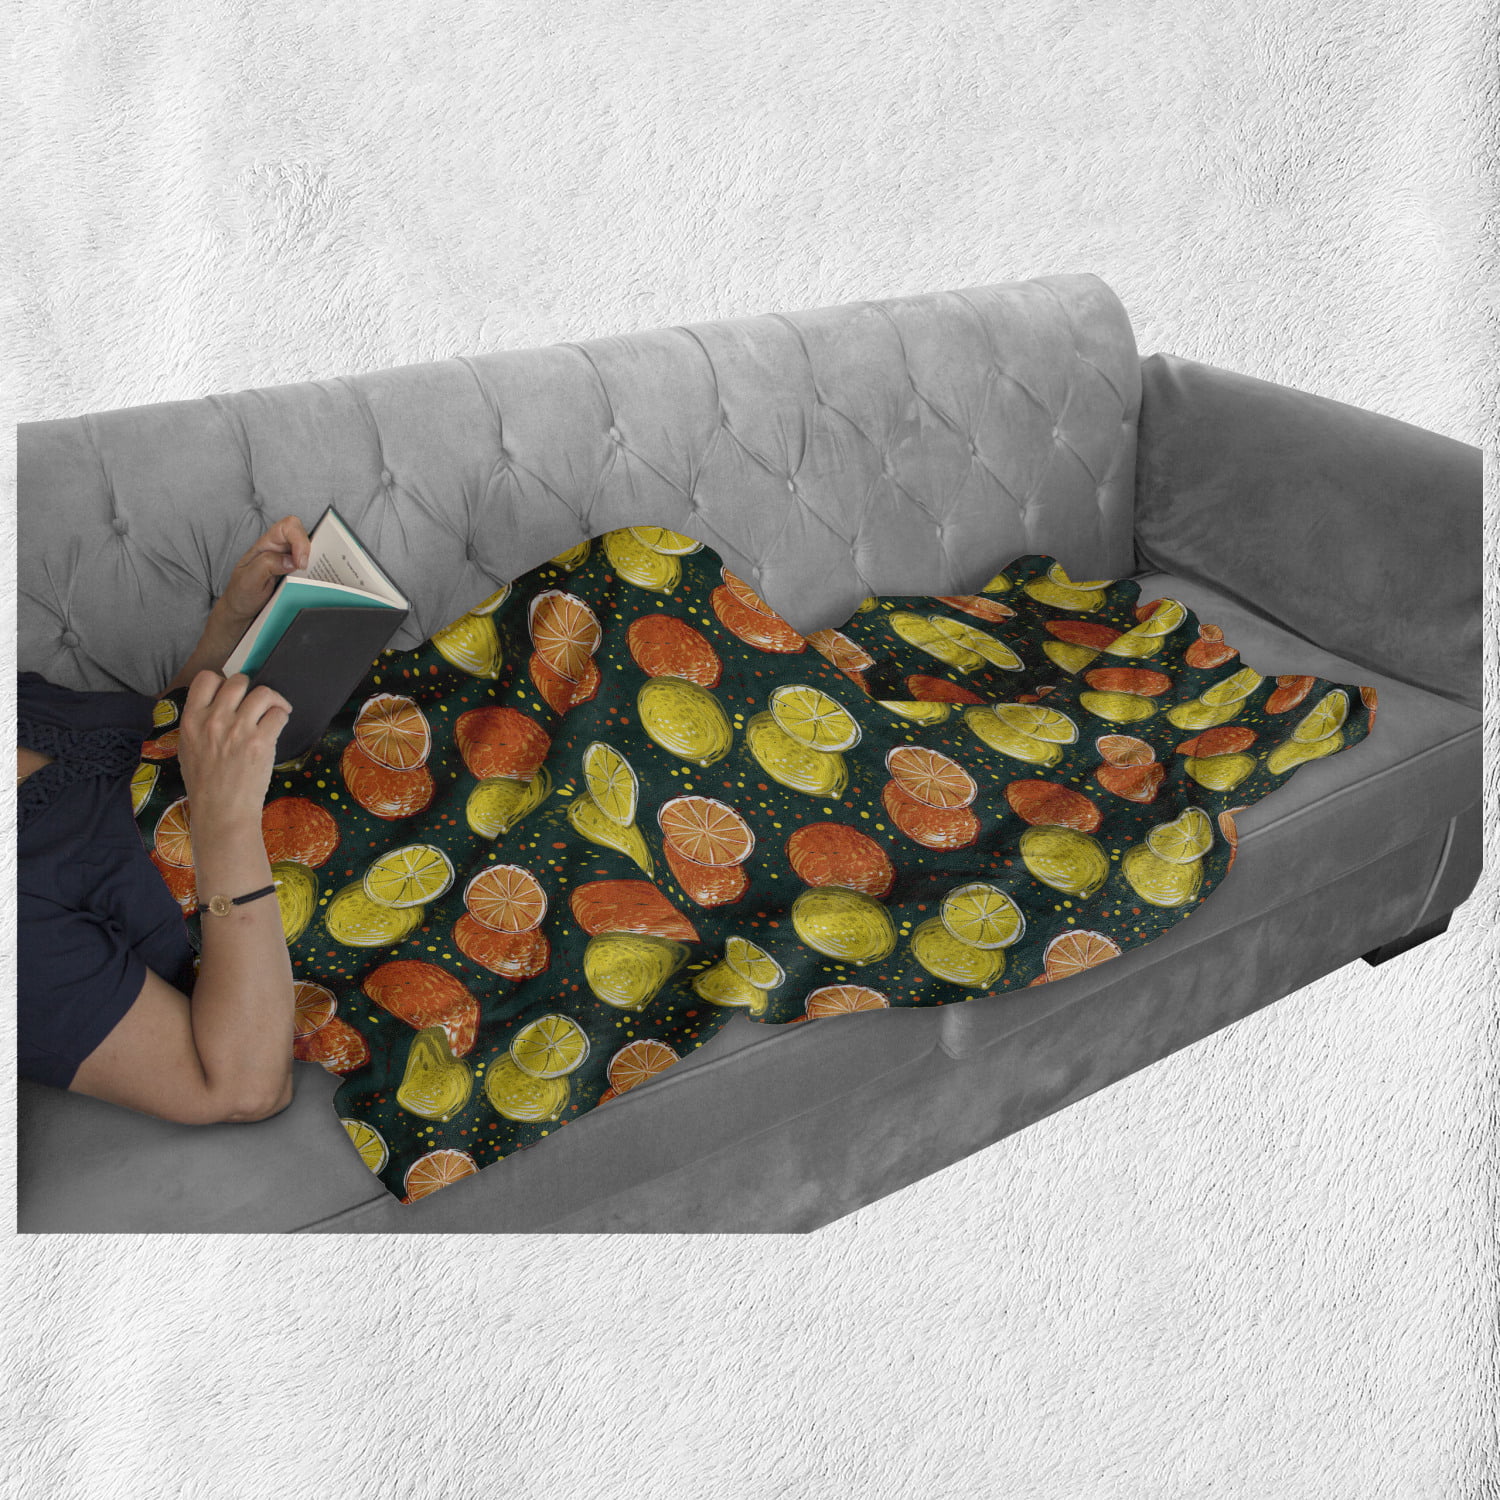 Ambesonne Fruit Soft Flannel Fleece Throw Blanket Cozy Plush for Indoor and Outdoor Use Dark Teal Multicolor Hand Drawn Like Oranges and Lemons Illustration on Polka Dotted Background 50 x 60